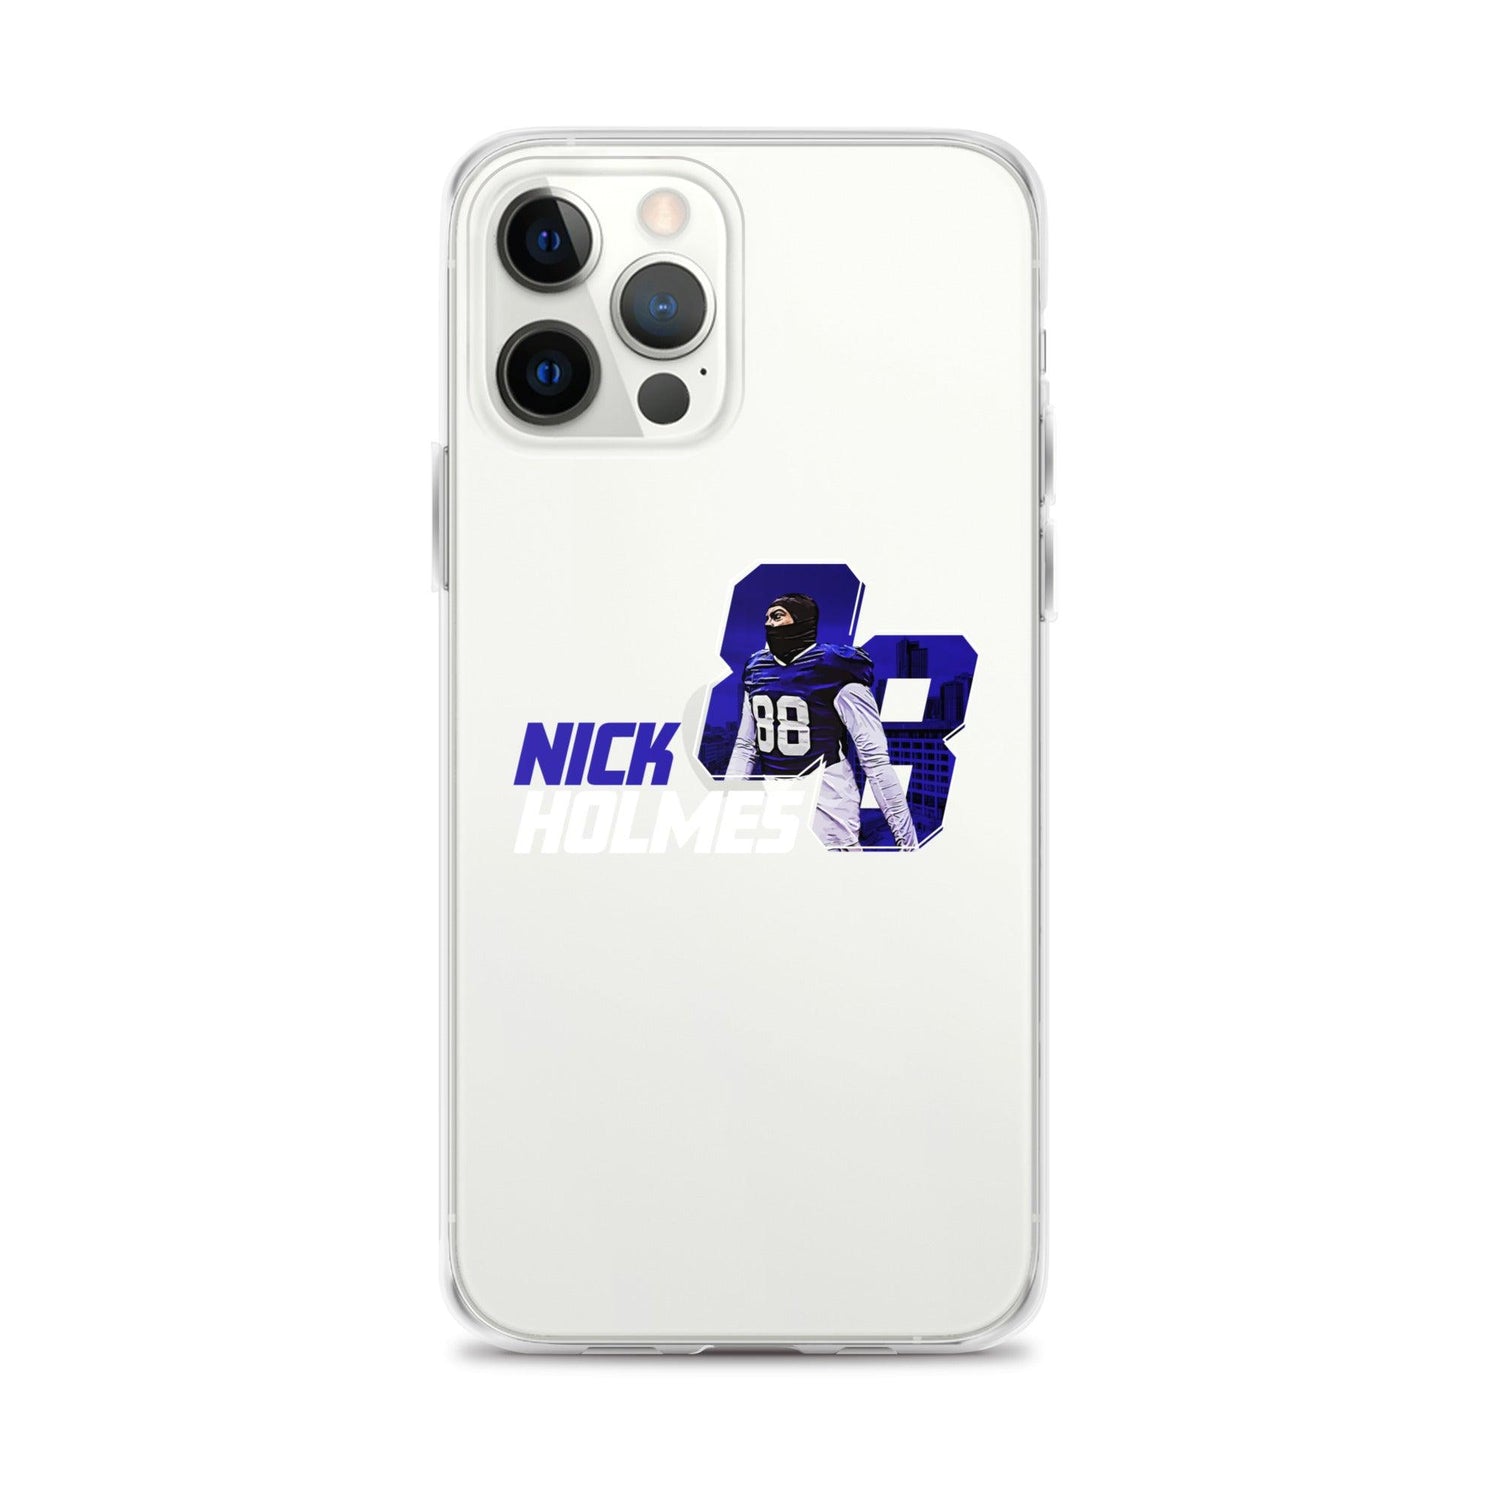 Nick Holmes "Gameday" iPhone Case - Fan Arch